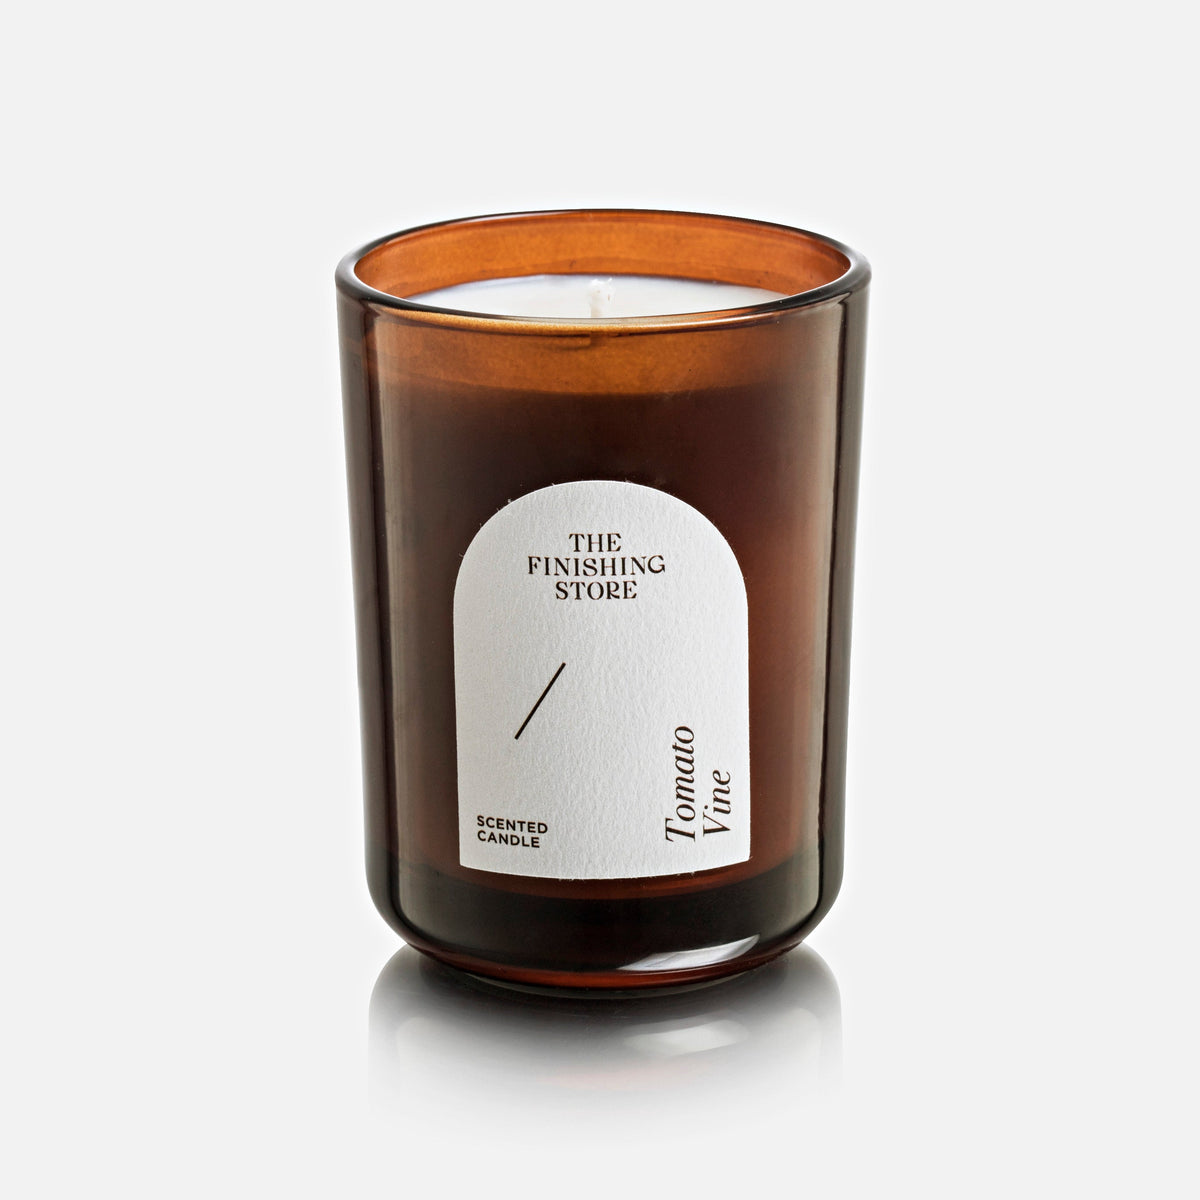 Tomato Vine Leaf Scented Candle - The Finishing Store South Africa